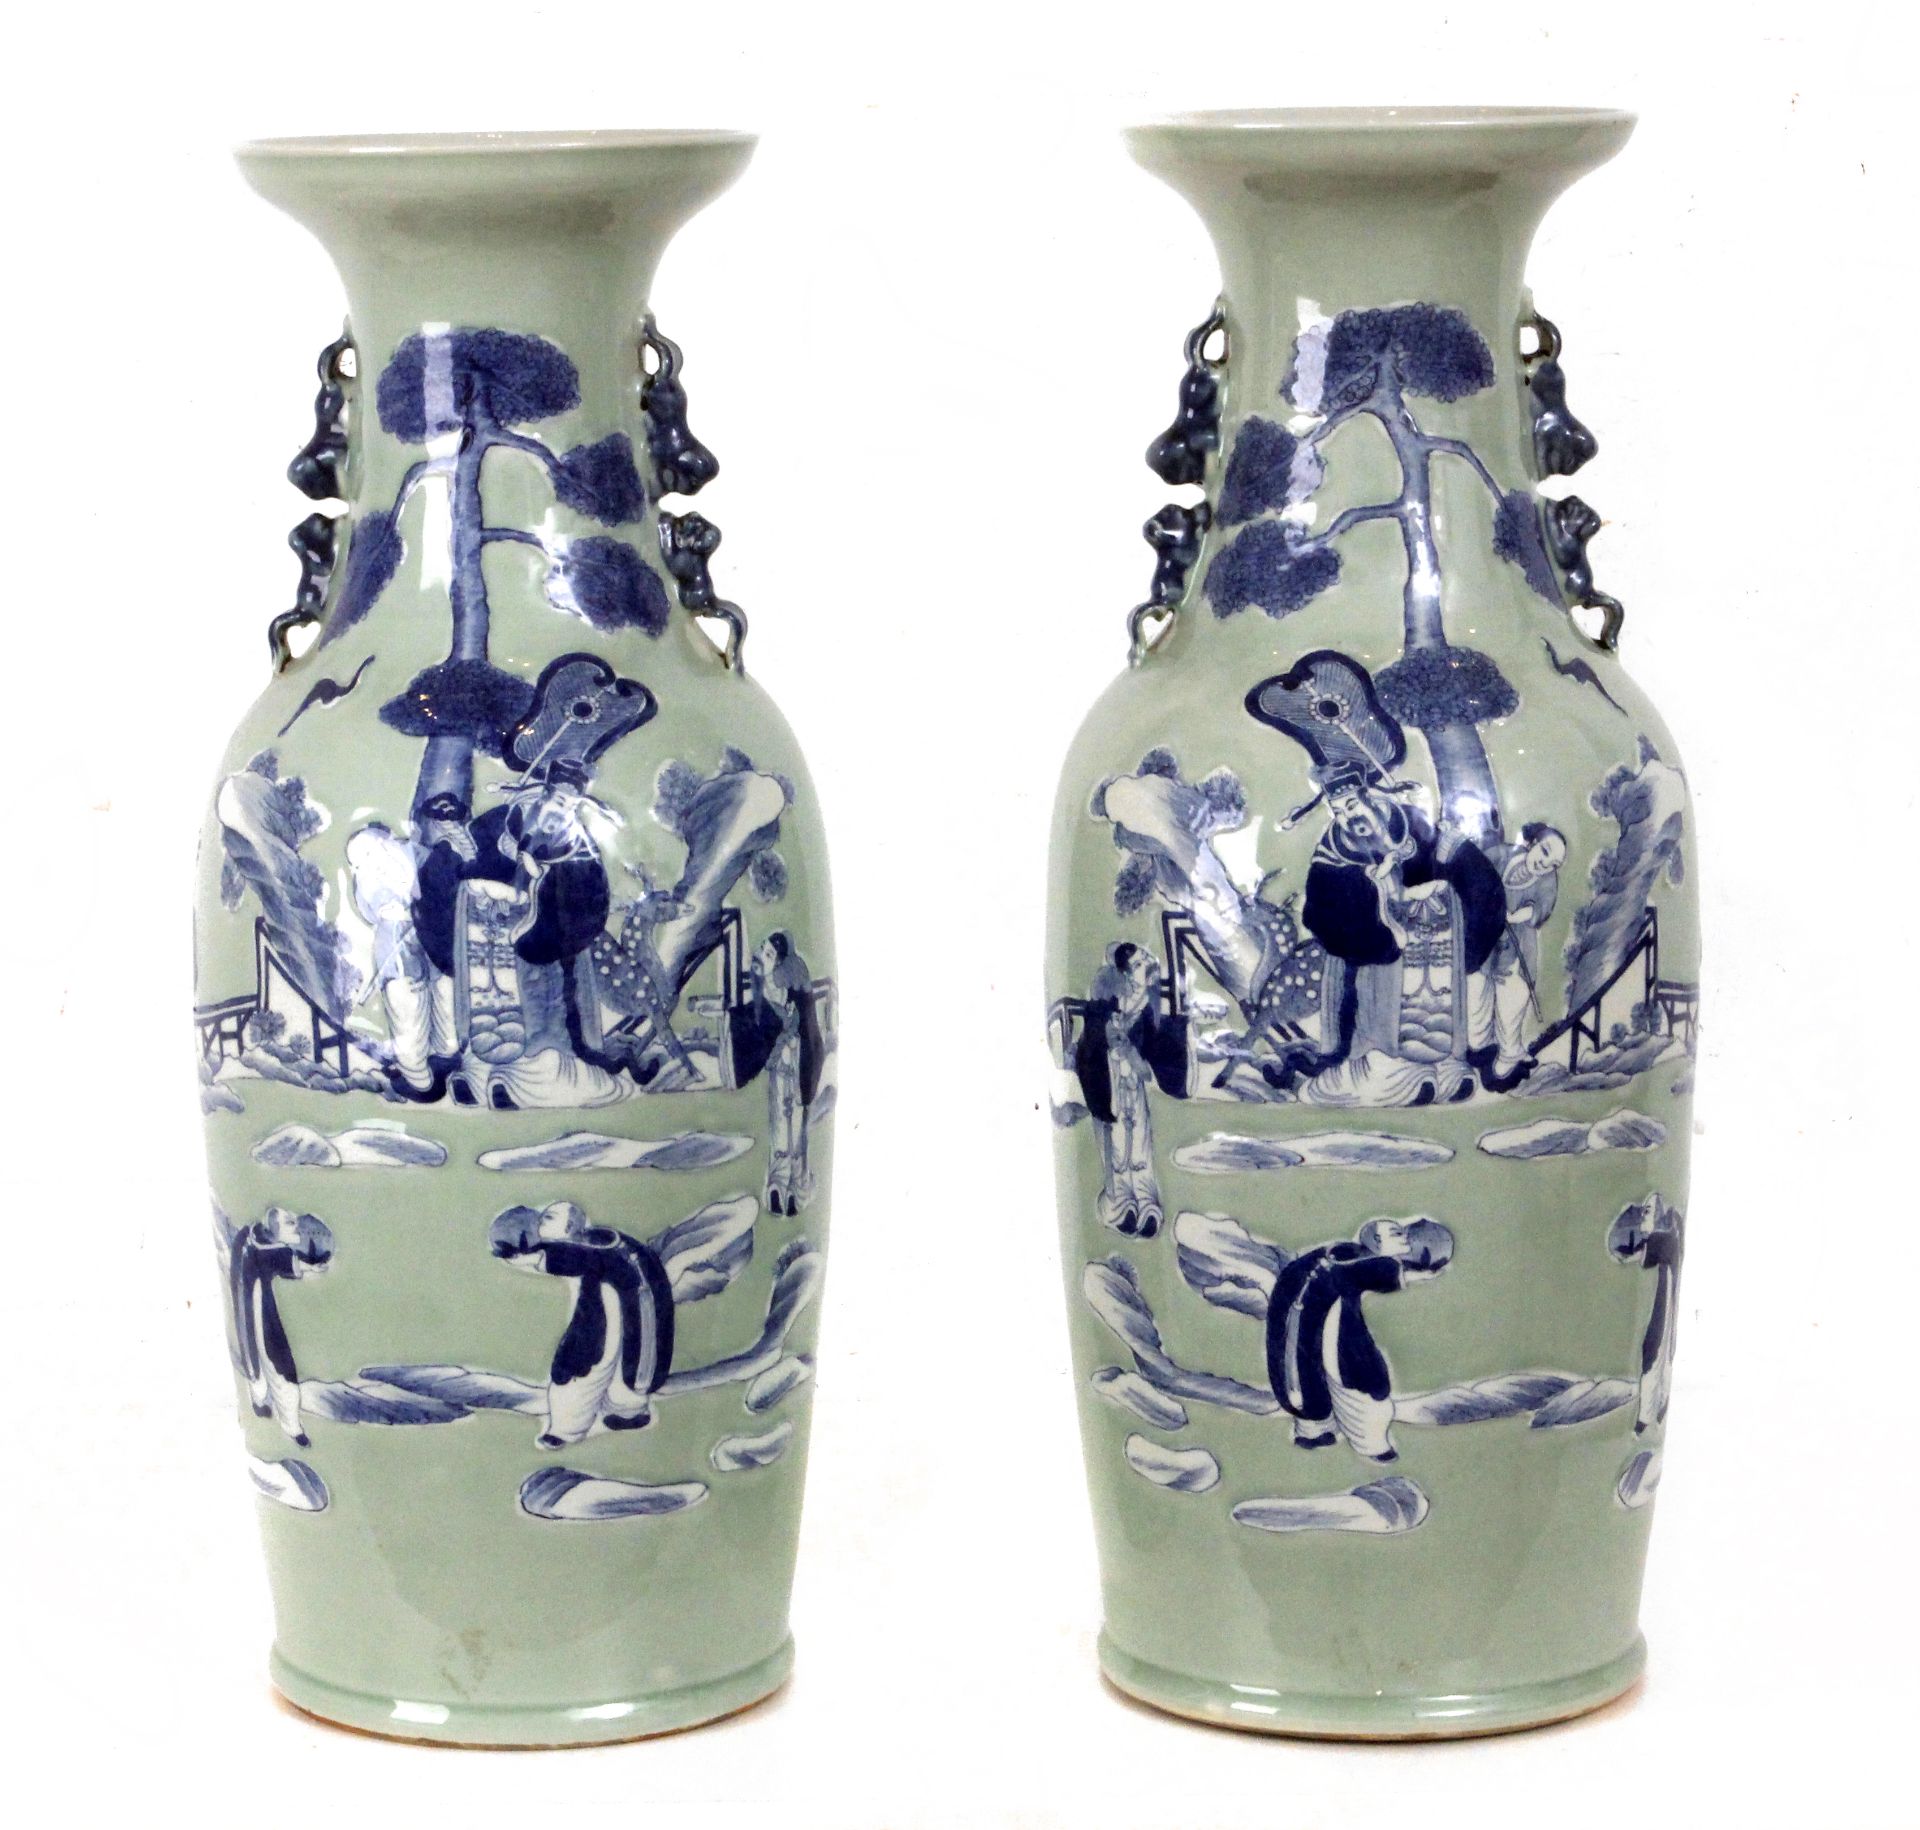 A pair of early 20th century Chinese vases from Qing dynasty